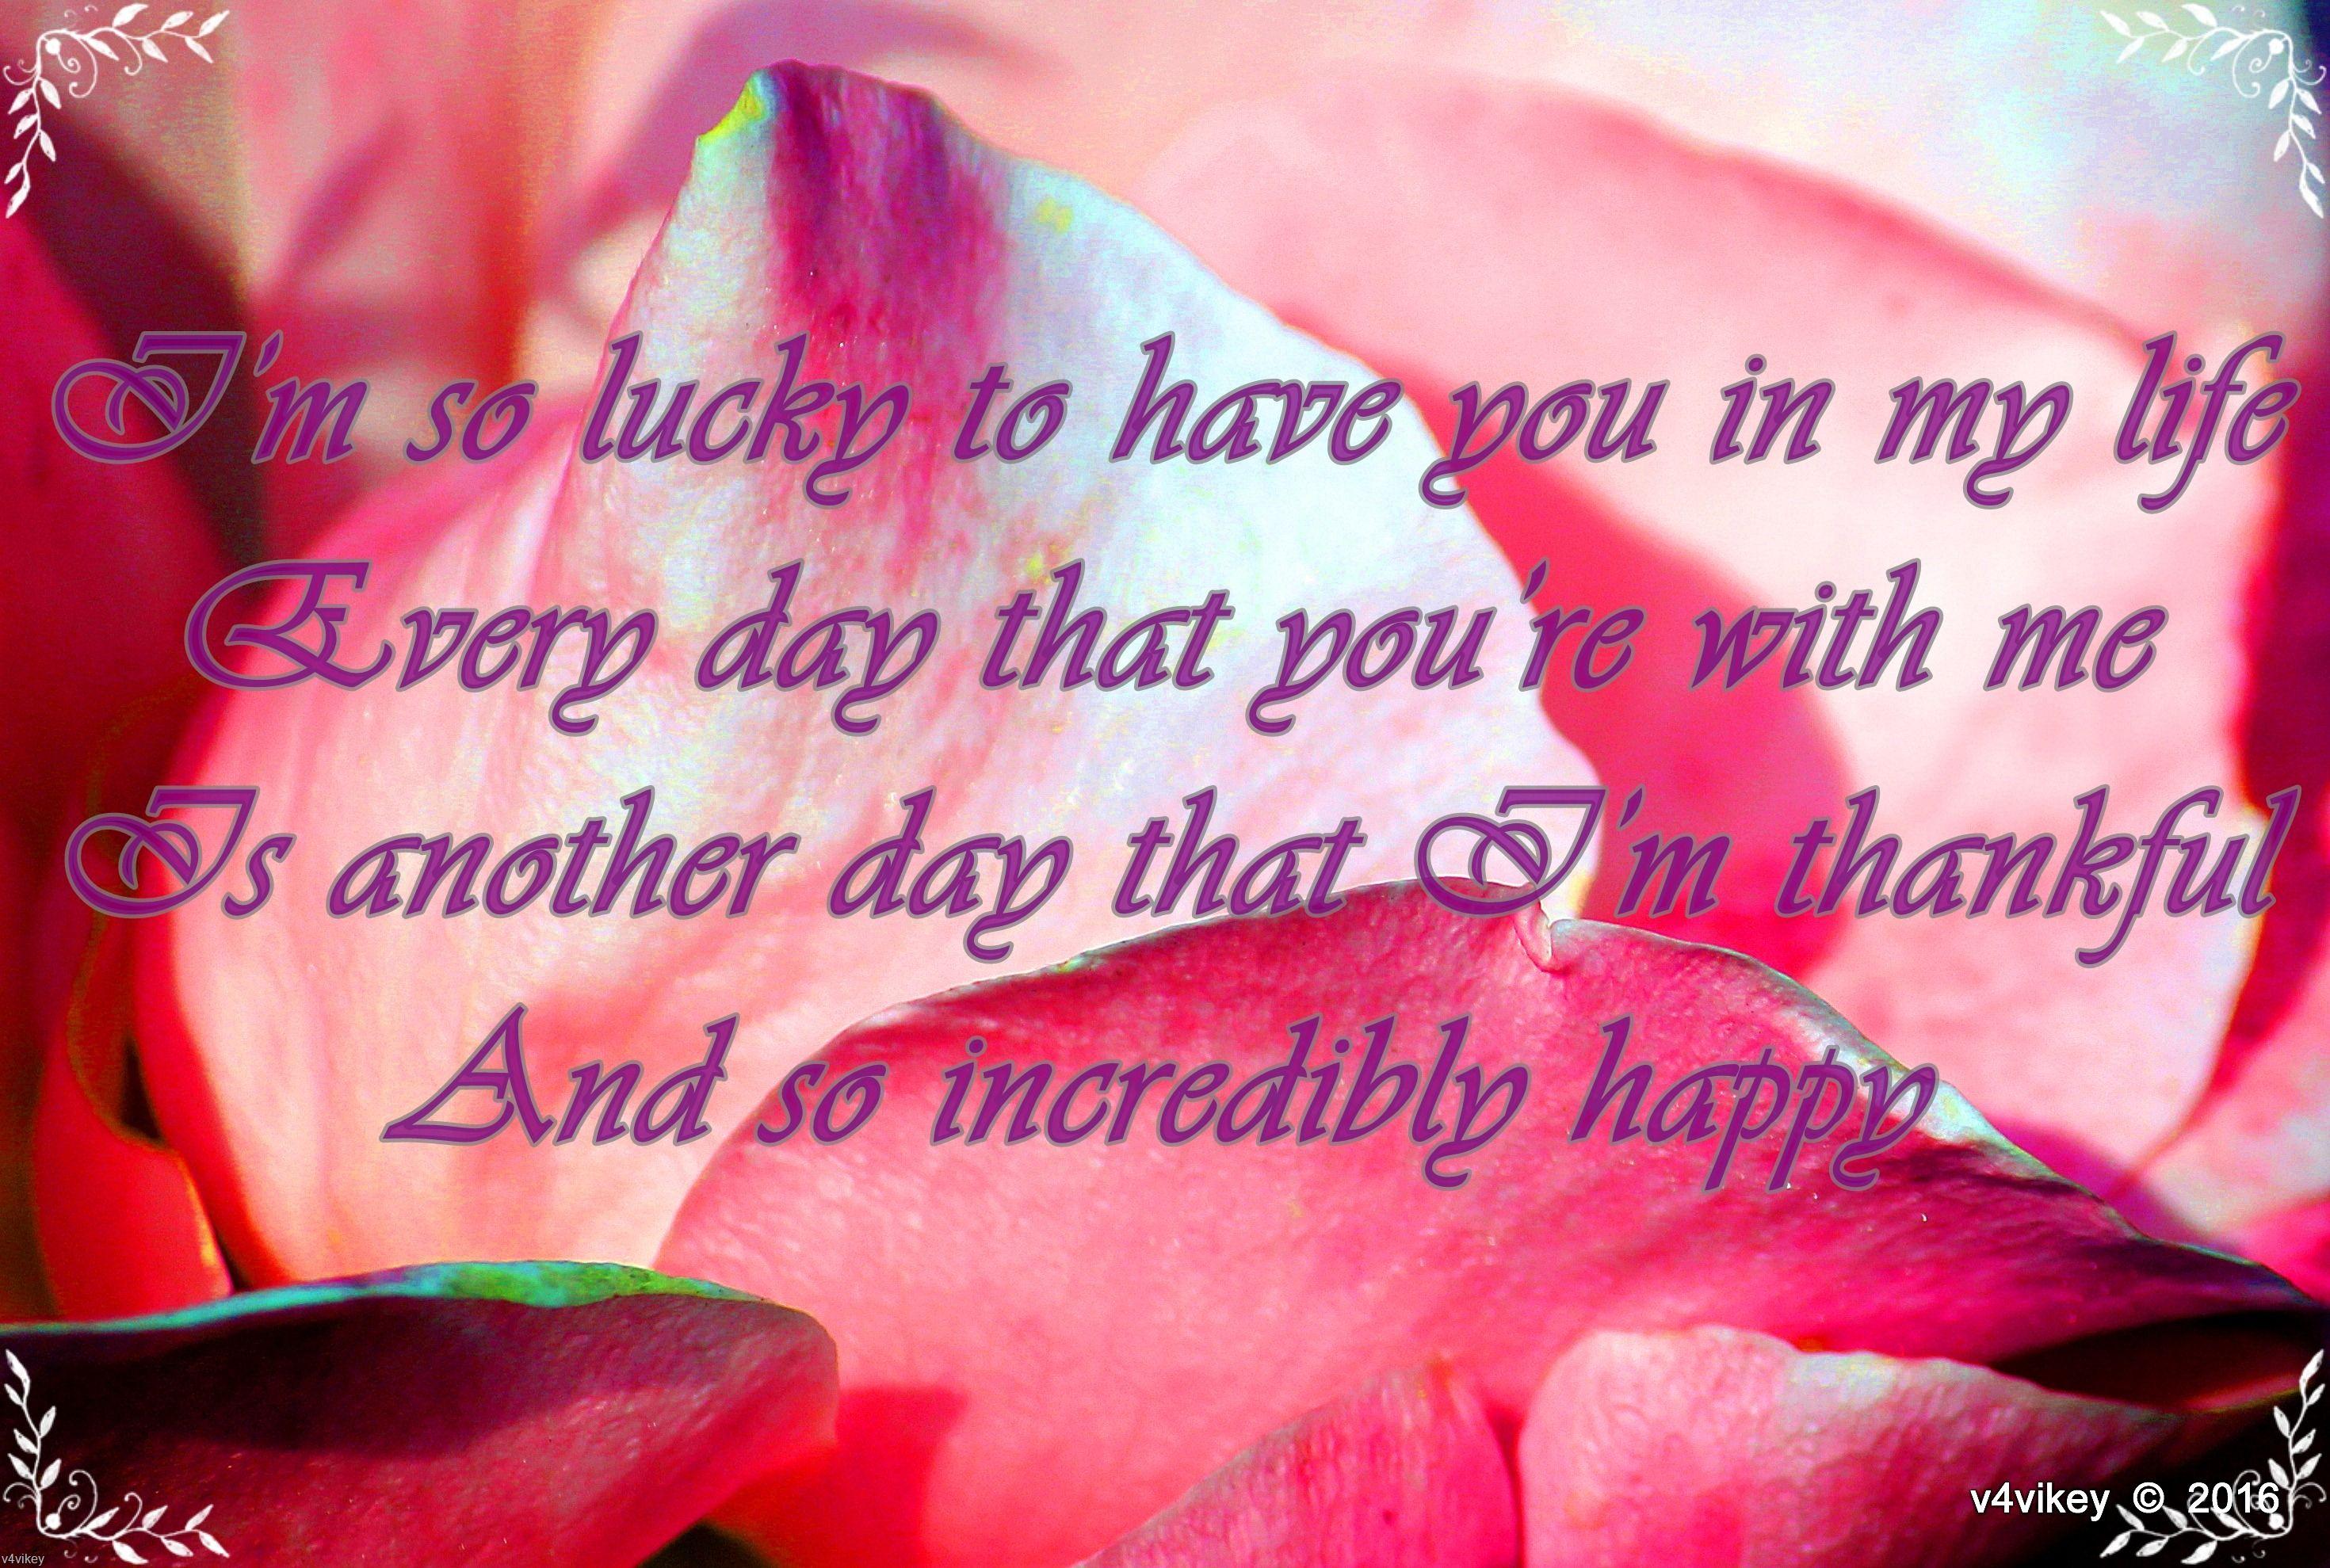 I am so lucky to have you in my life « Wallpaper Tadka